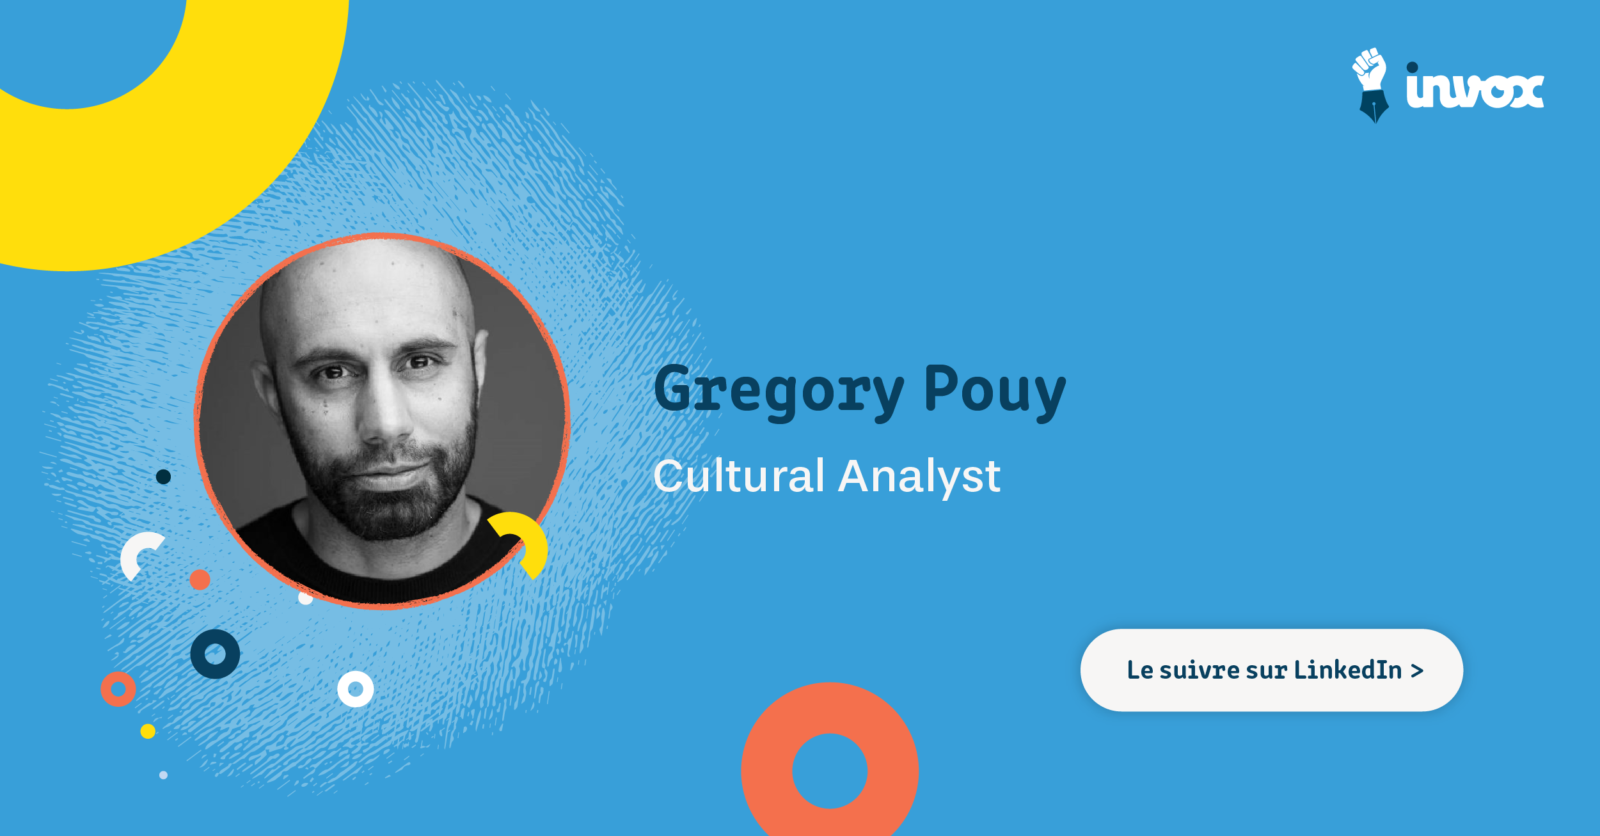 Gregory Pouy